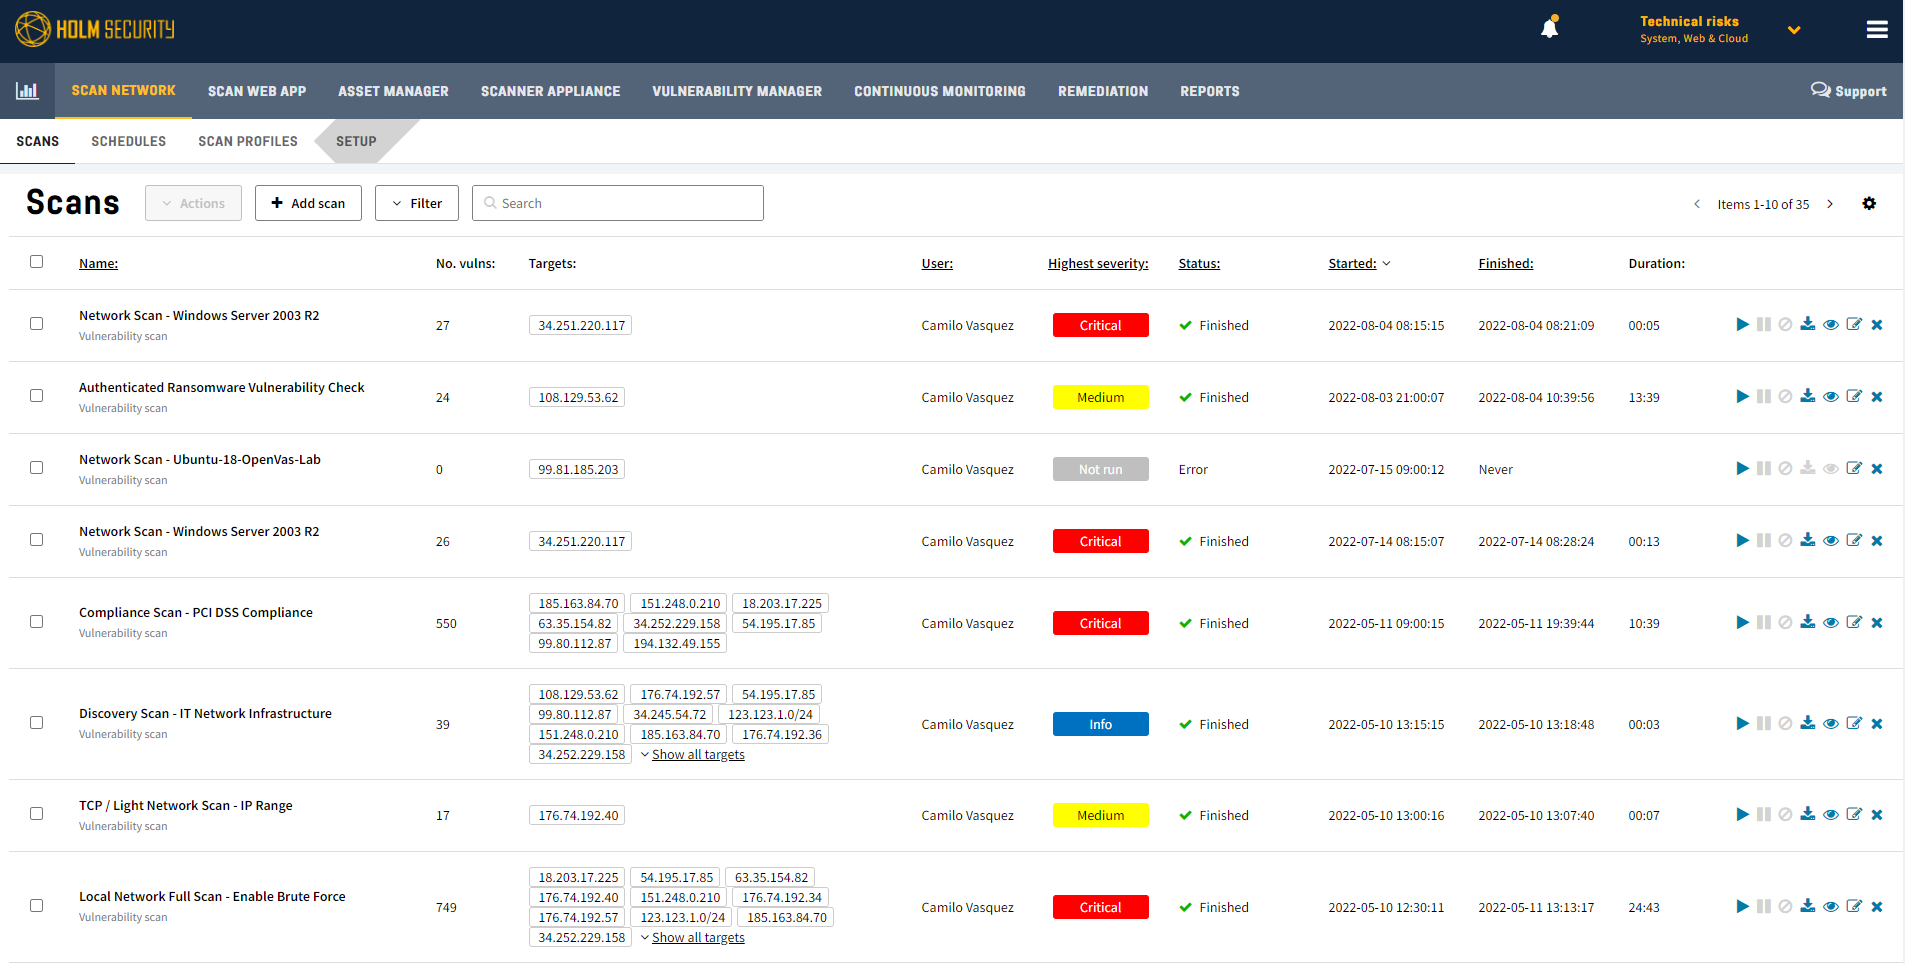 Holm Security VMP Software - Security Center - System & Network Vulnerability Assessment Dashboard